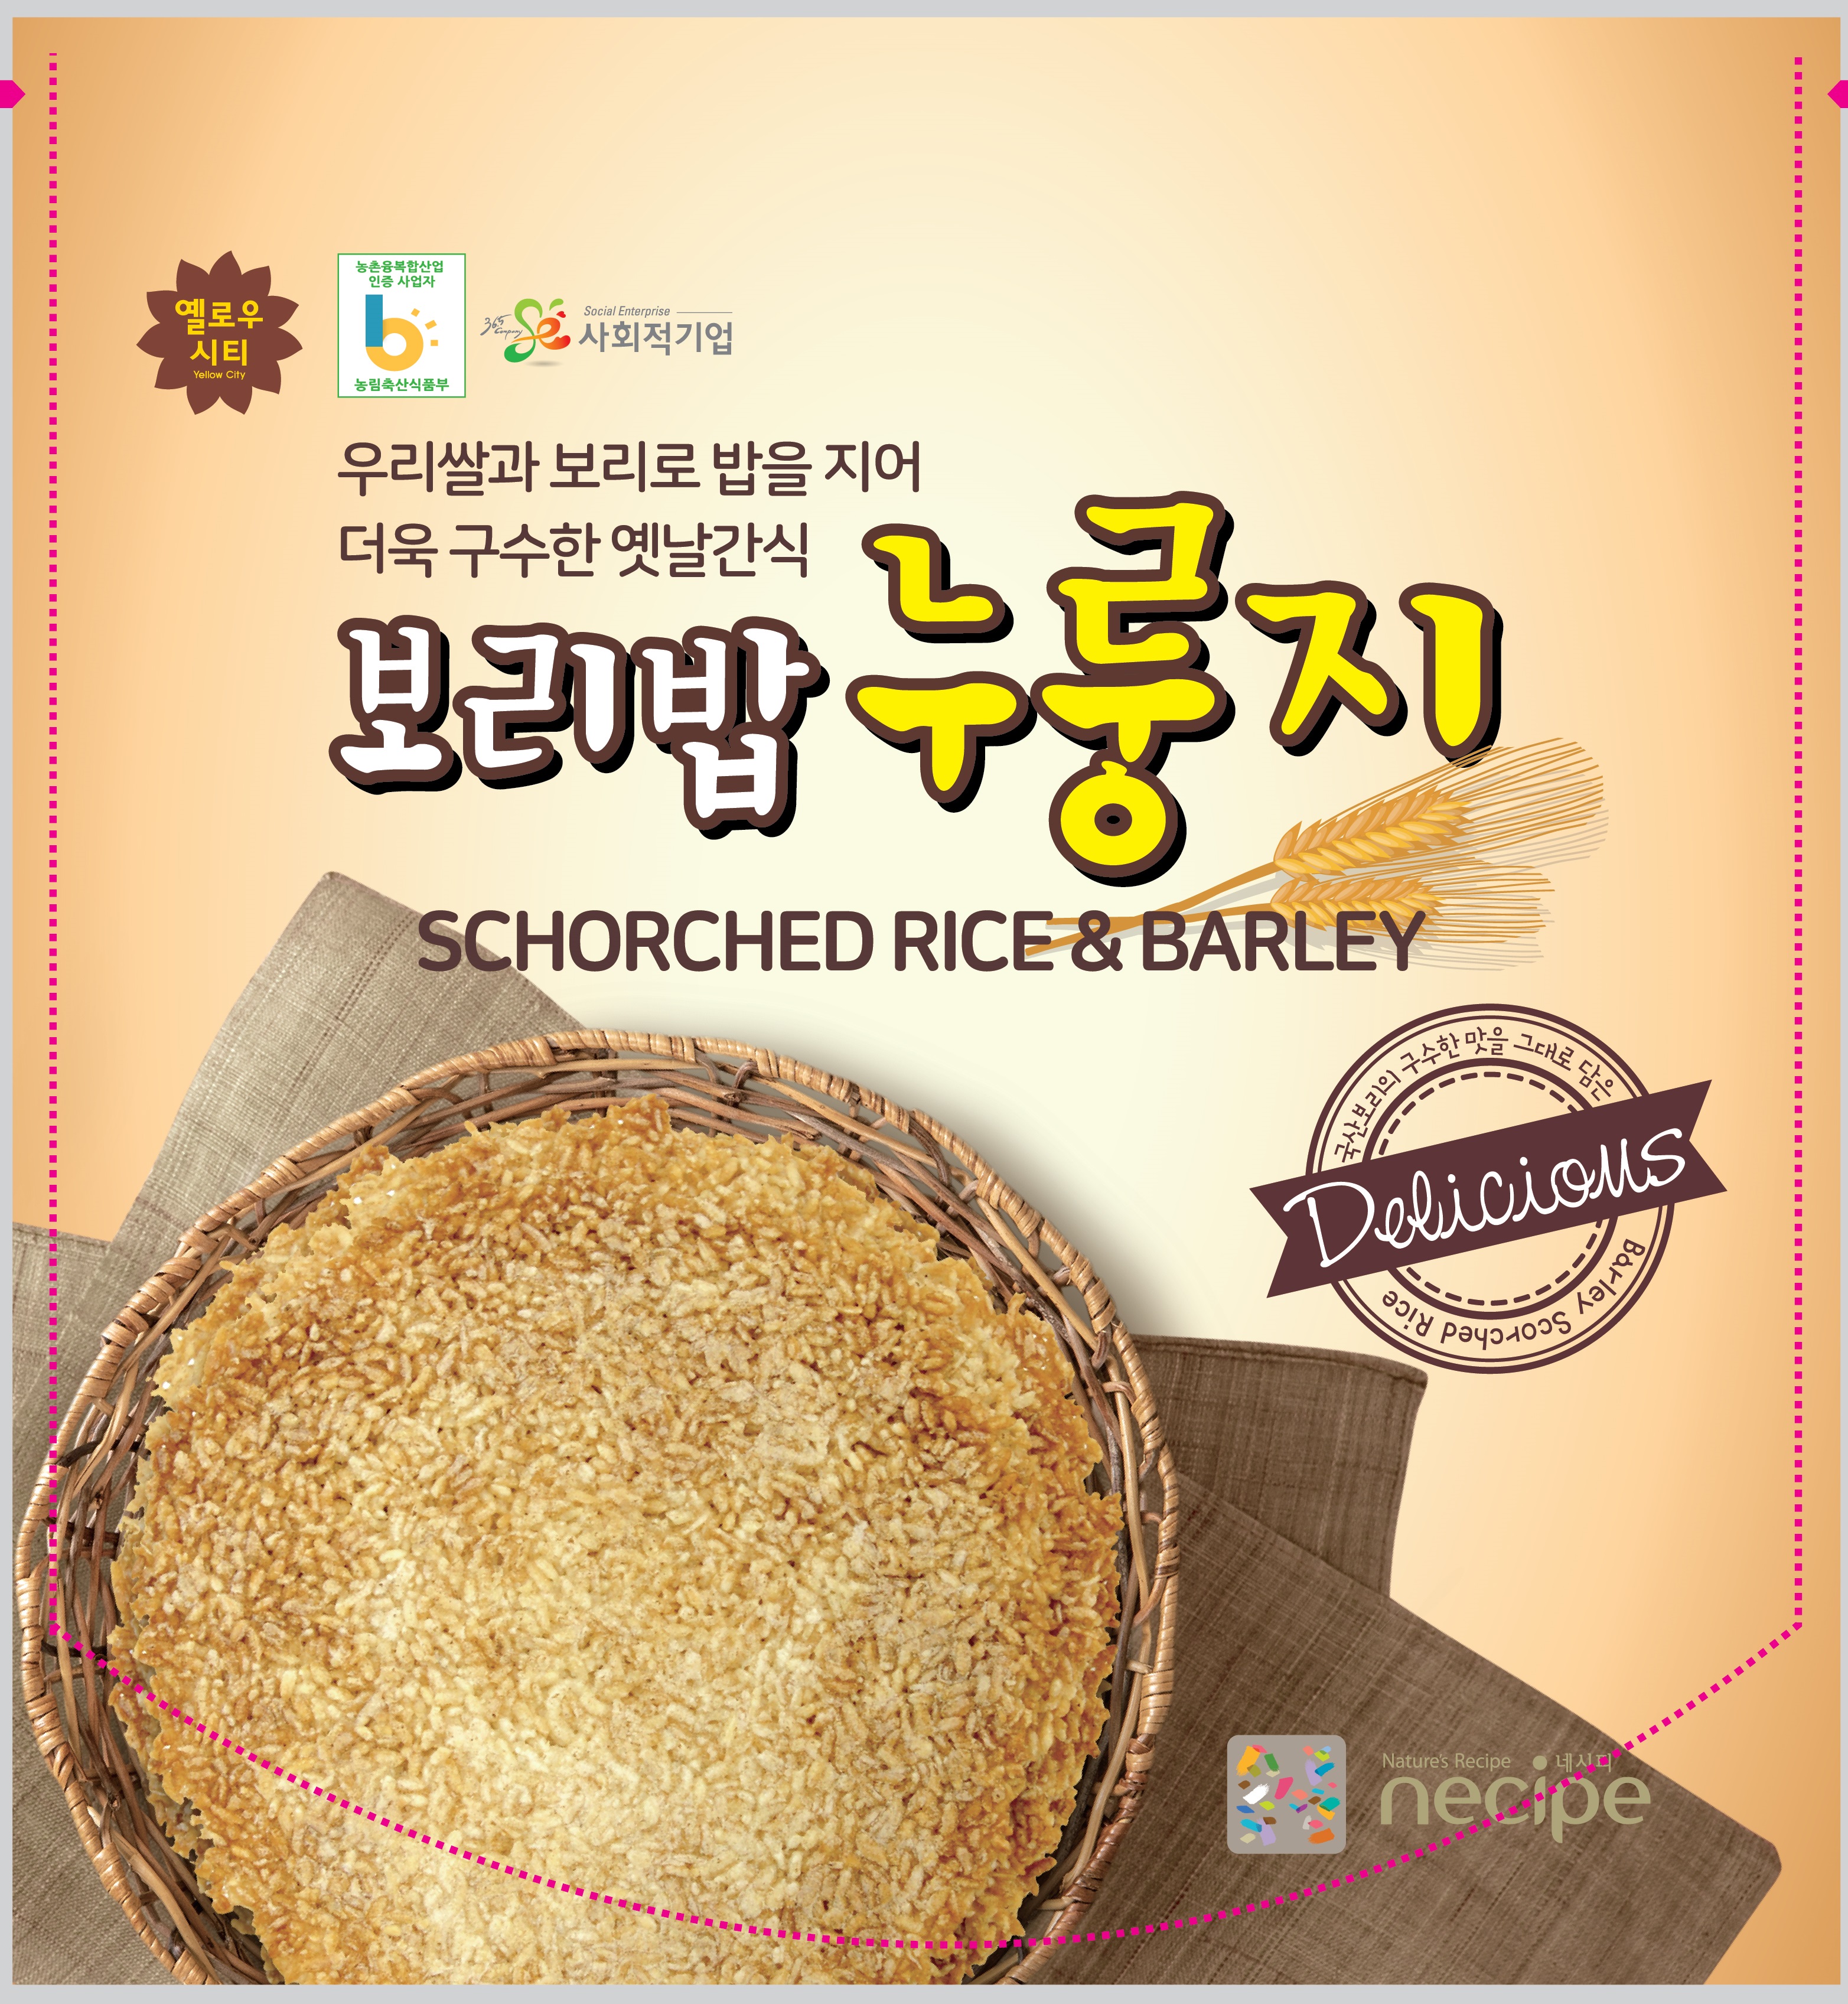 SCORCHED RICE & BARLEY